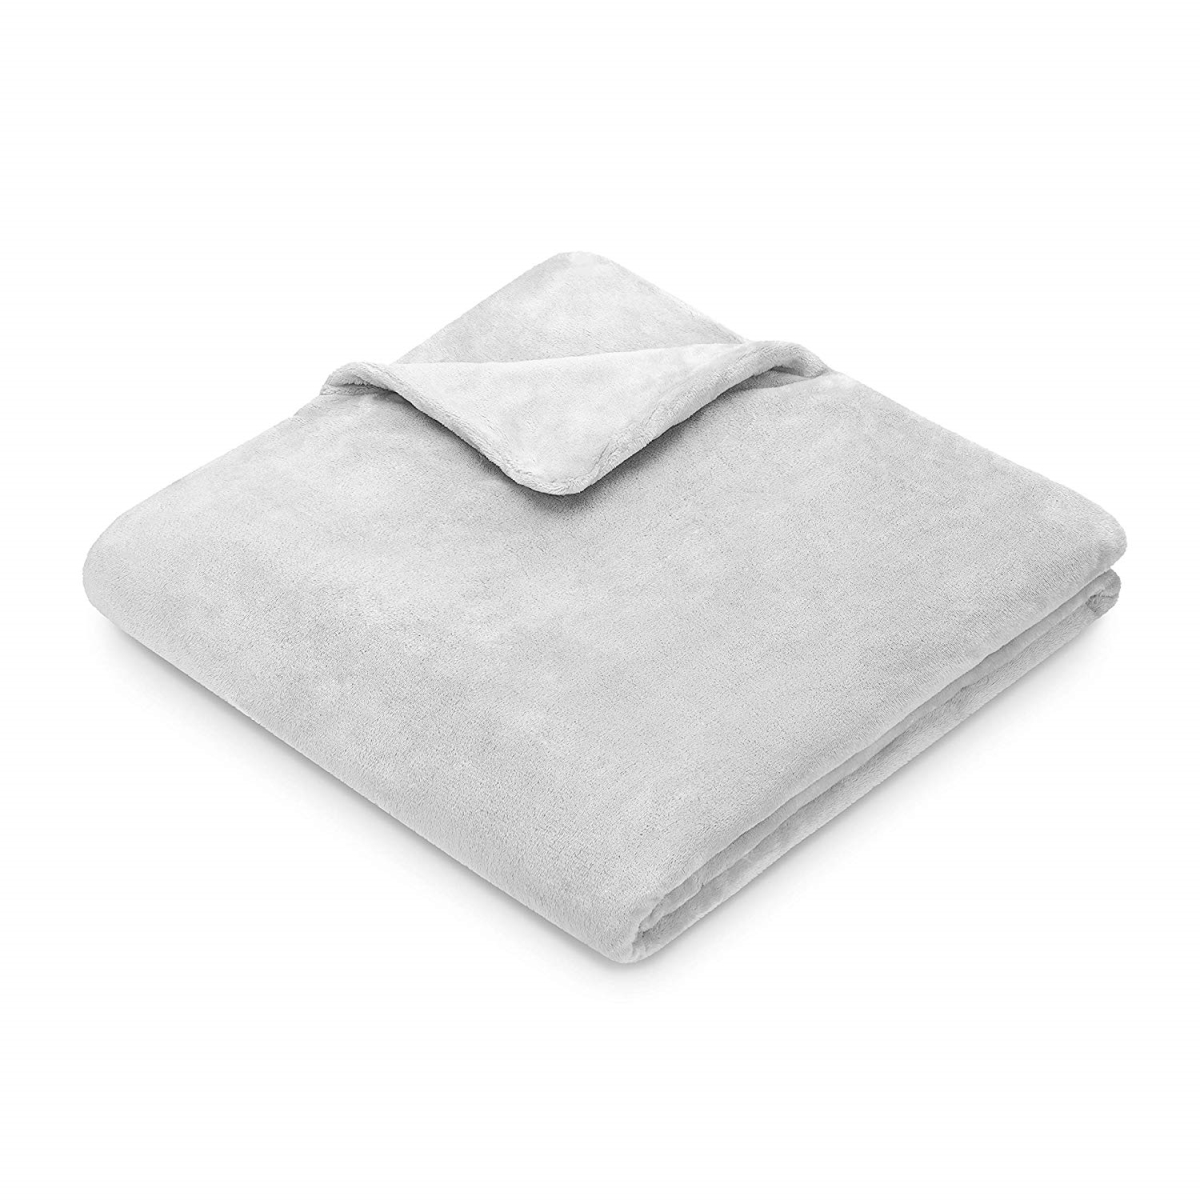 Drm-624-15-grey-a7 Dream Lab Acupressure Weighted Blanket - Gray